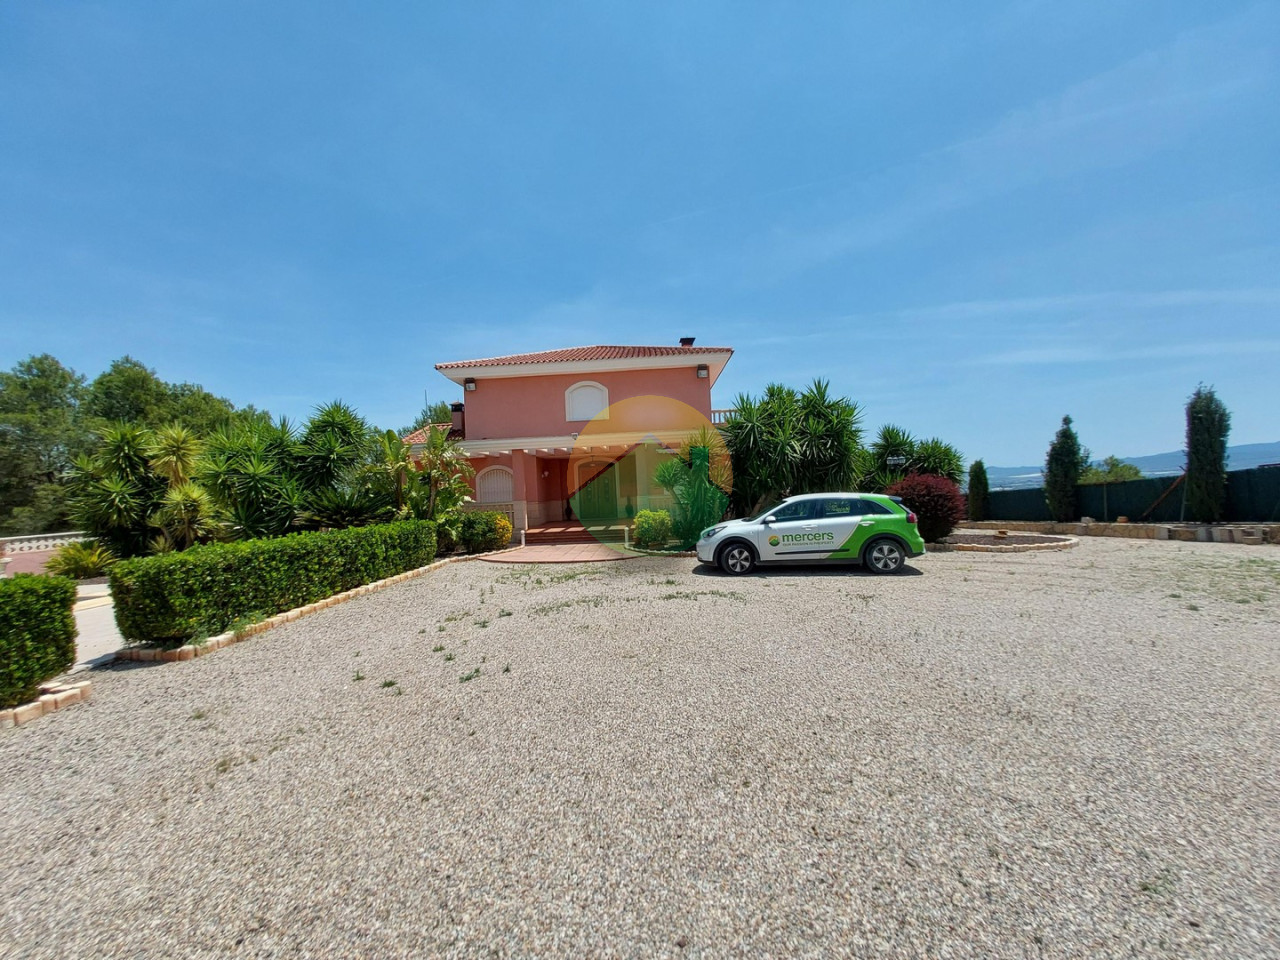 8 Bedroom  Country Villa For Sale